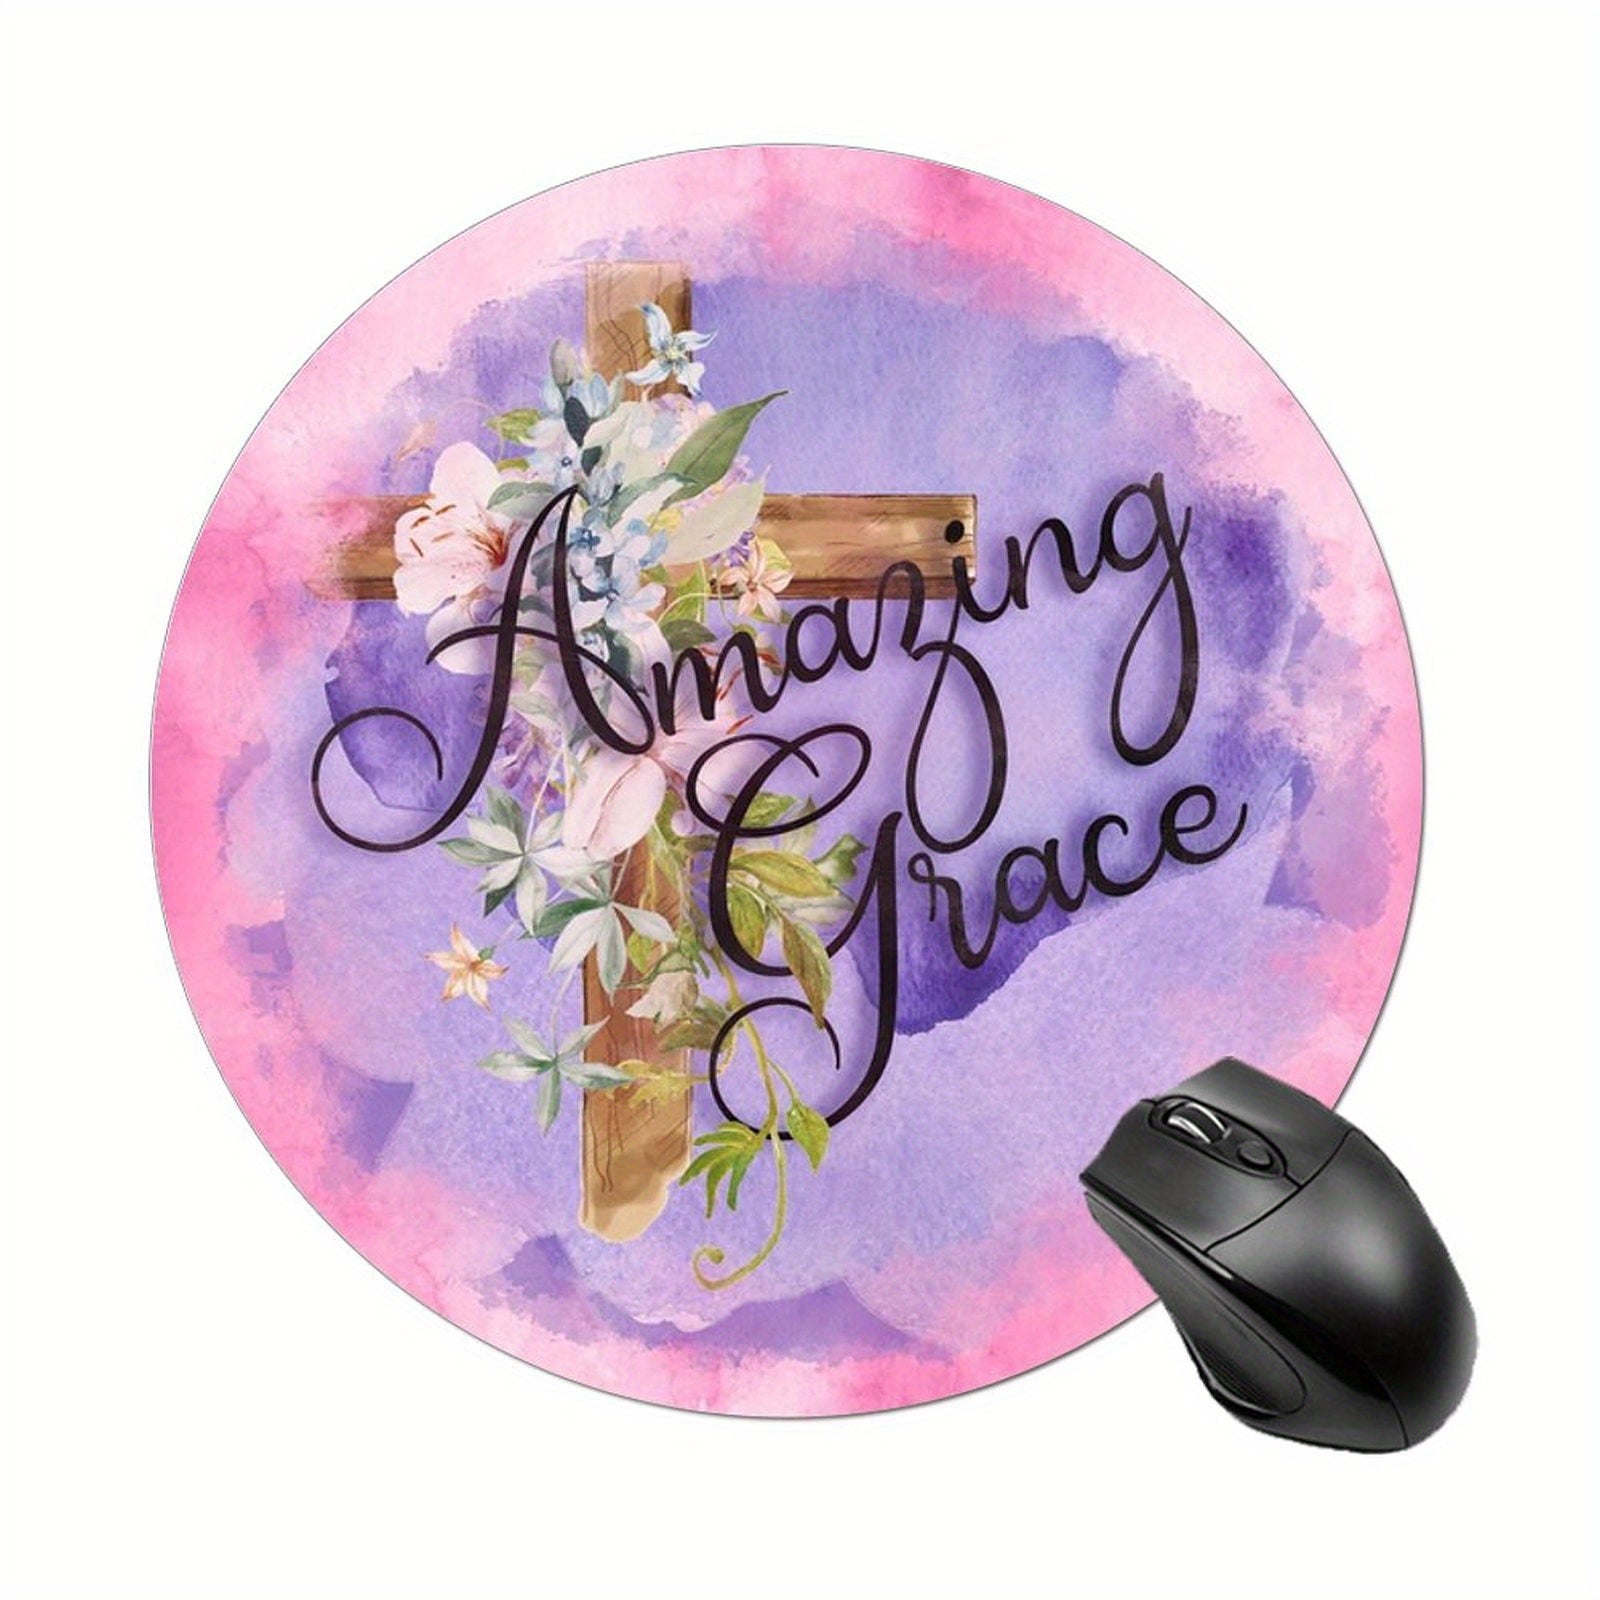 Amazing Grace Christian Computer Mouse Pad claimedbygoddesigns